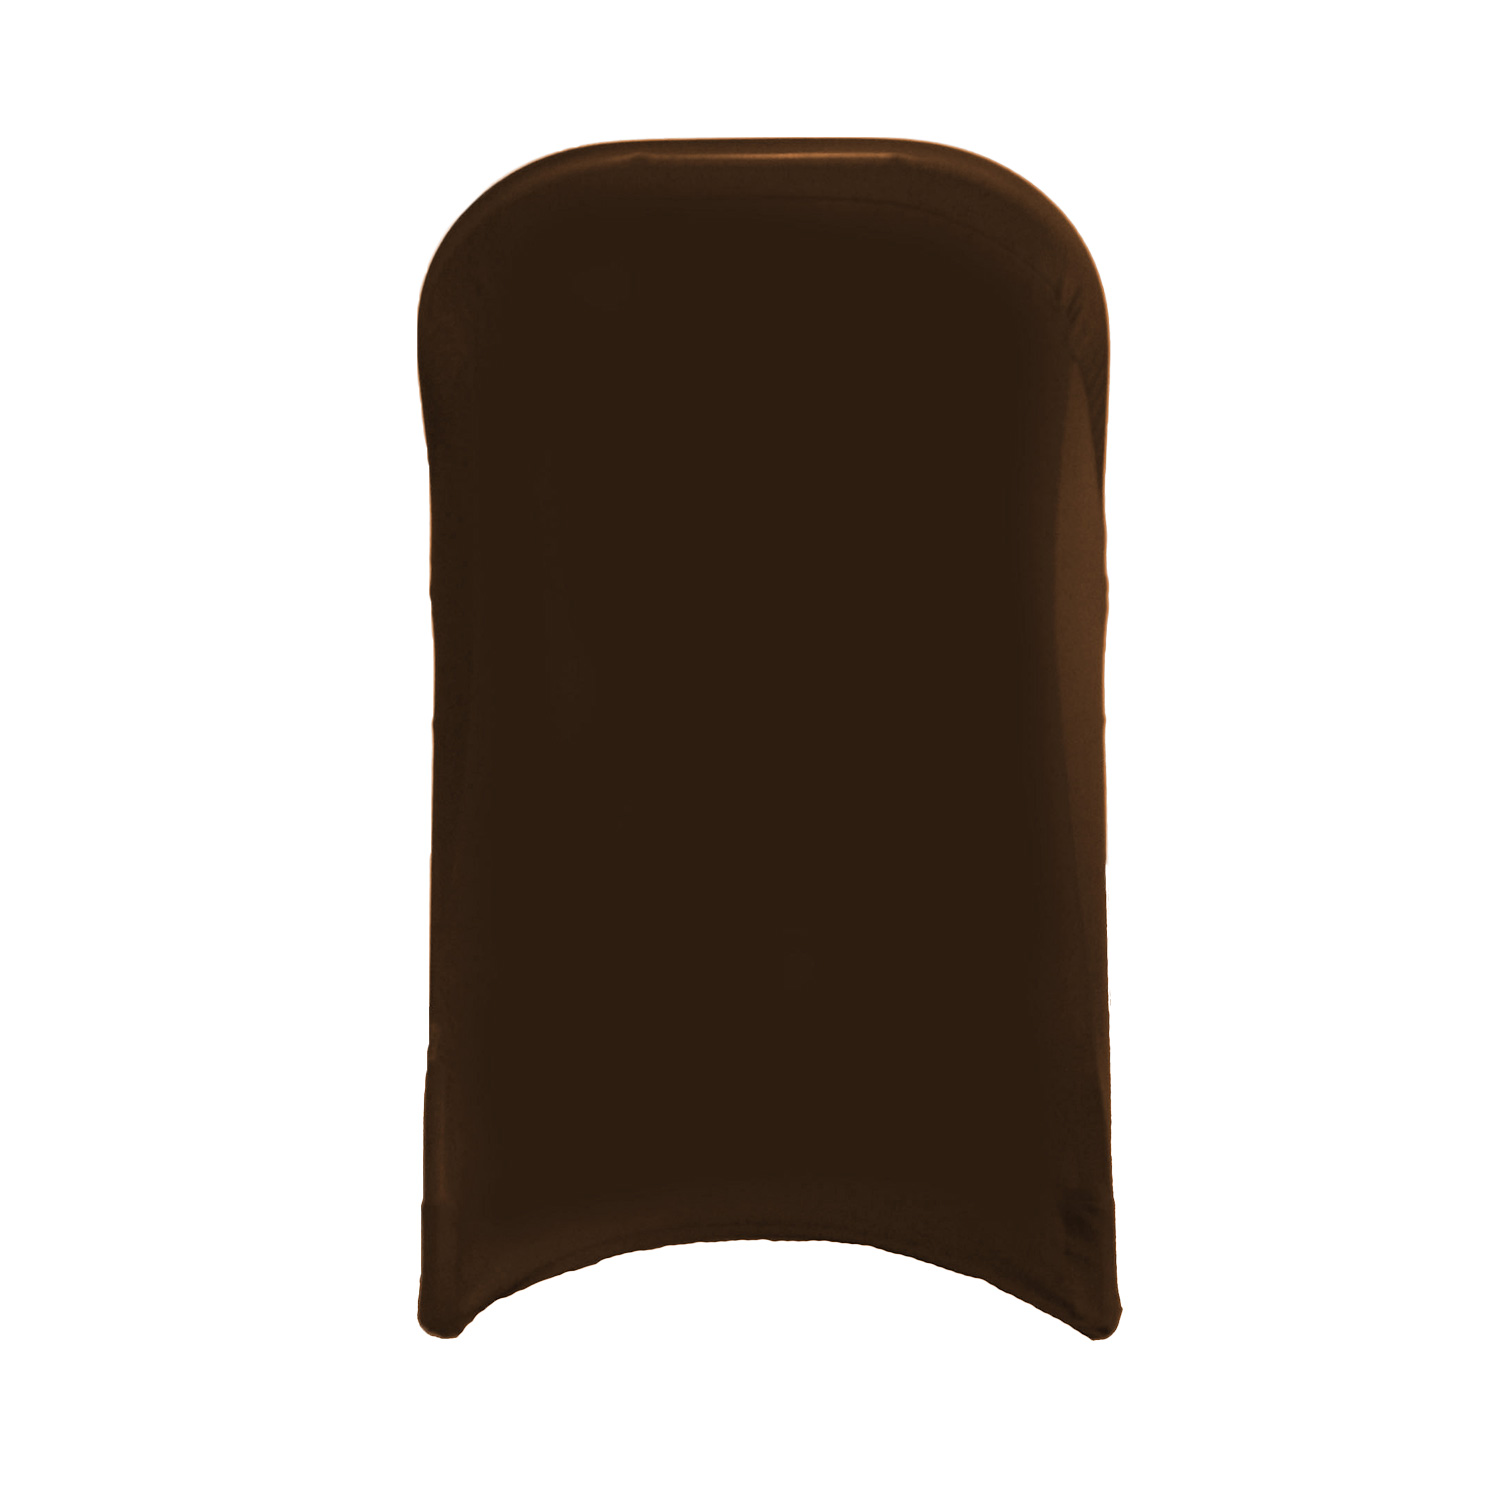 Your Chair Covers - Spandex Folding Chair Cover Chocolate Brown for Wedding, Party, Birthday, Patio, etc. - image 3 of 3